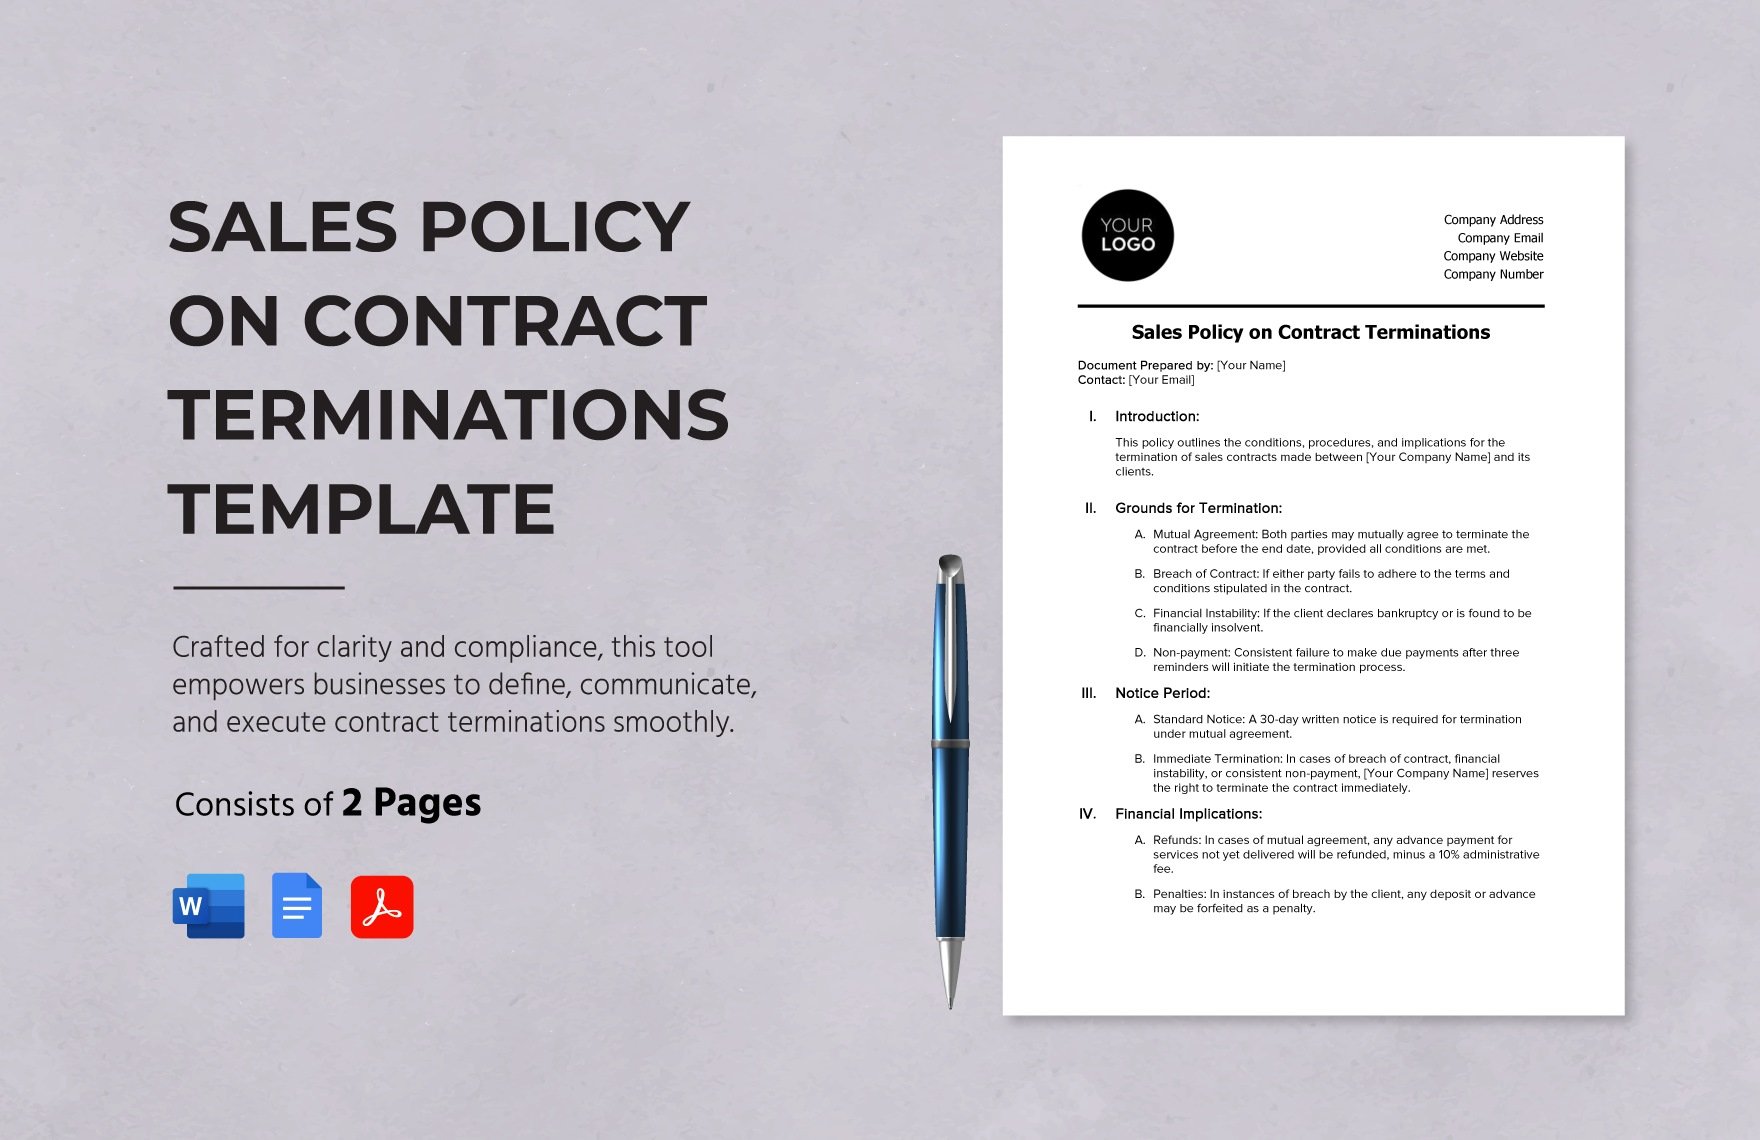 Sales Policy on Contract Terminations Template